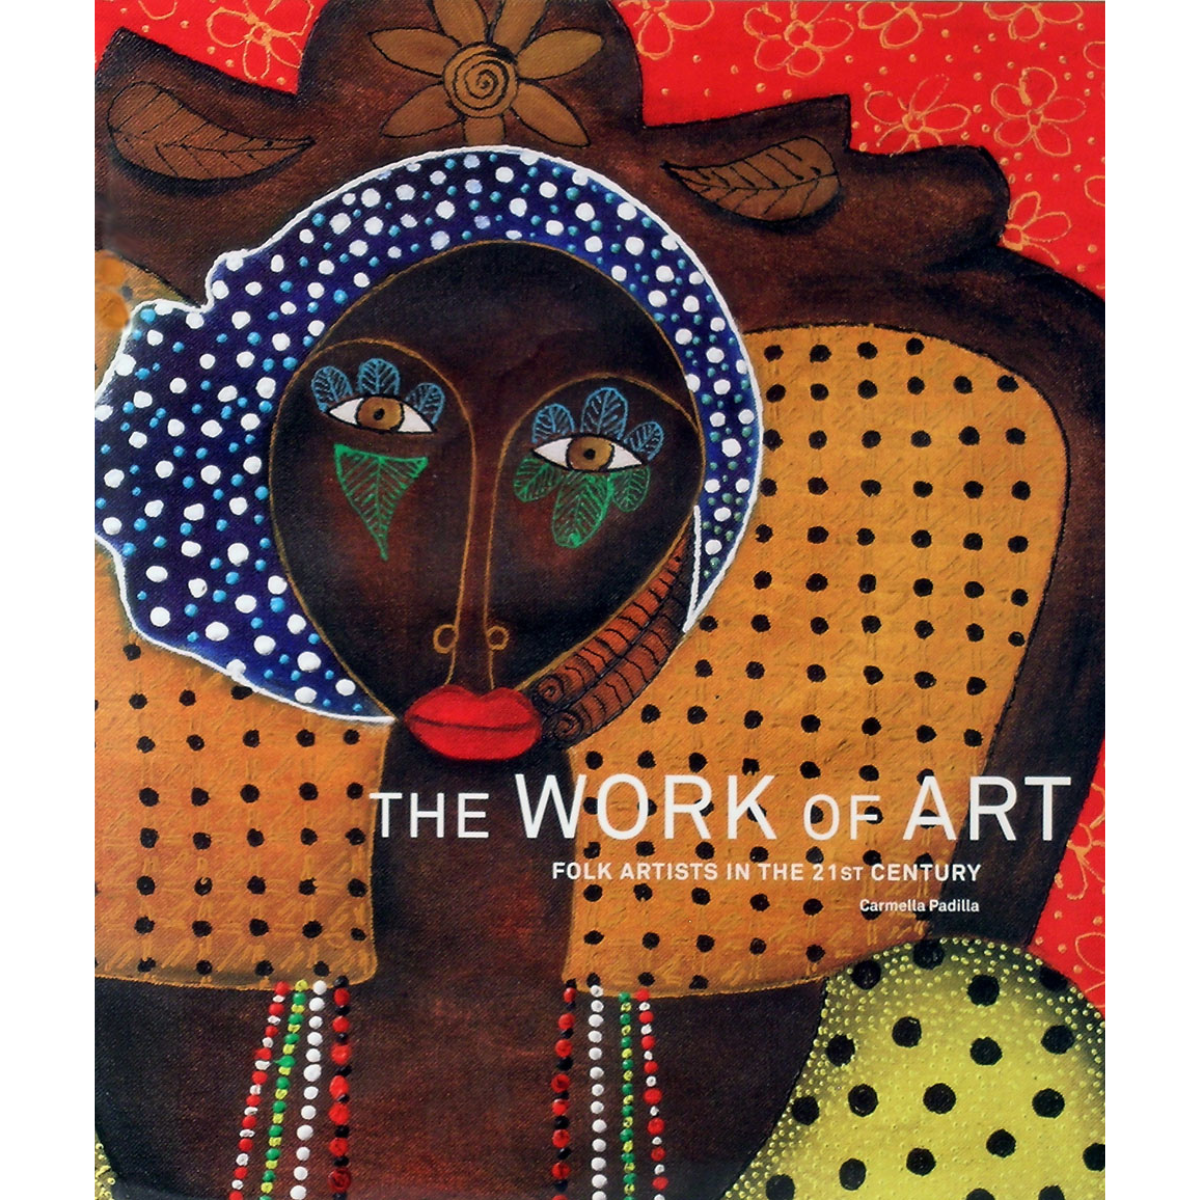 The Work of Art - Folk Artists in the 21st Century